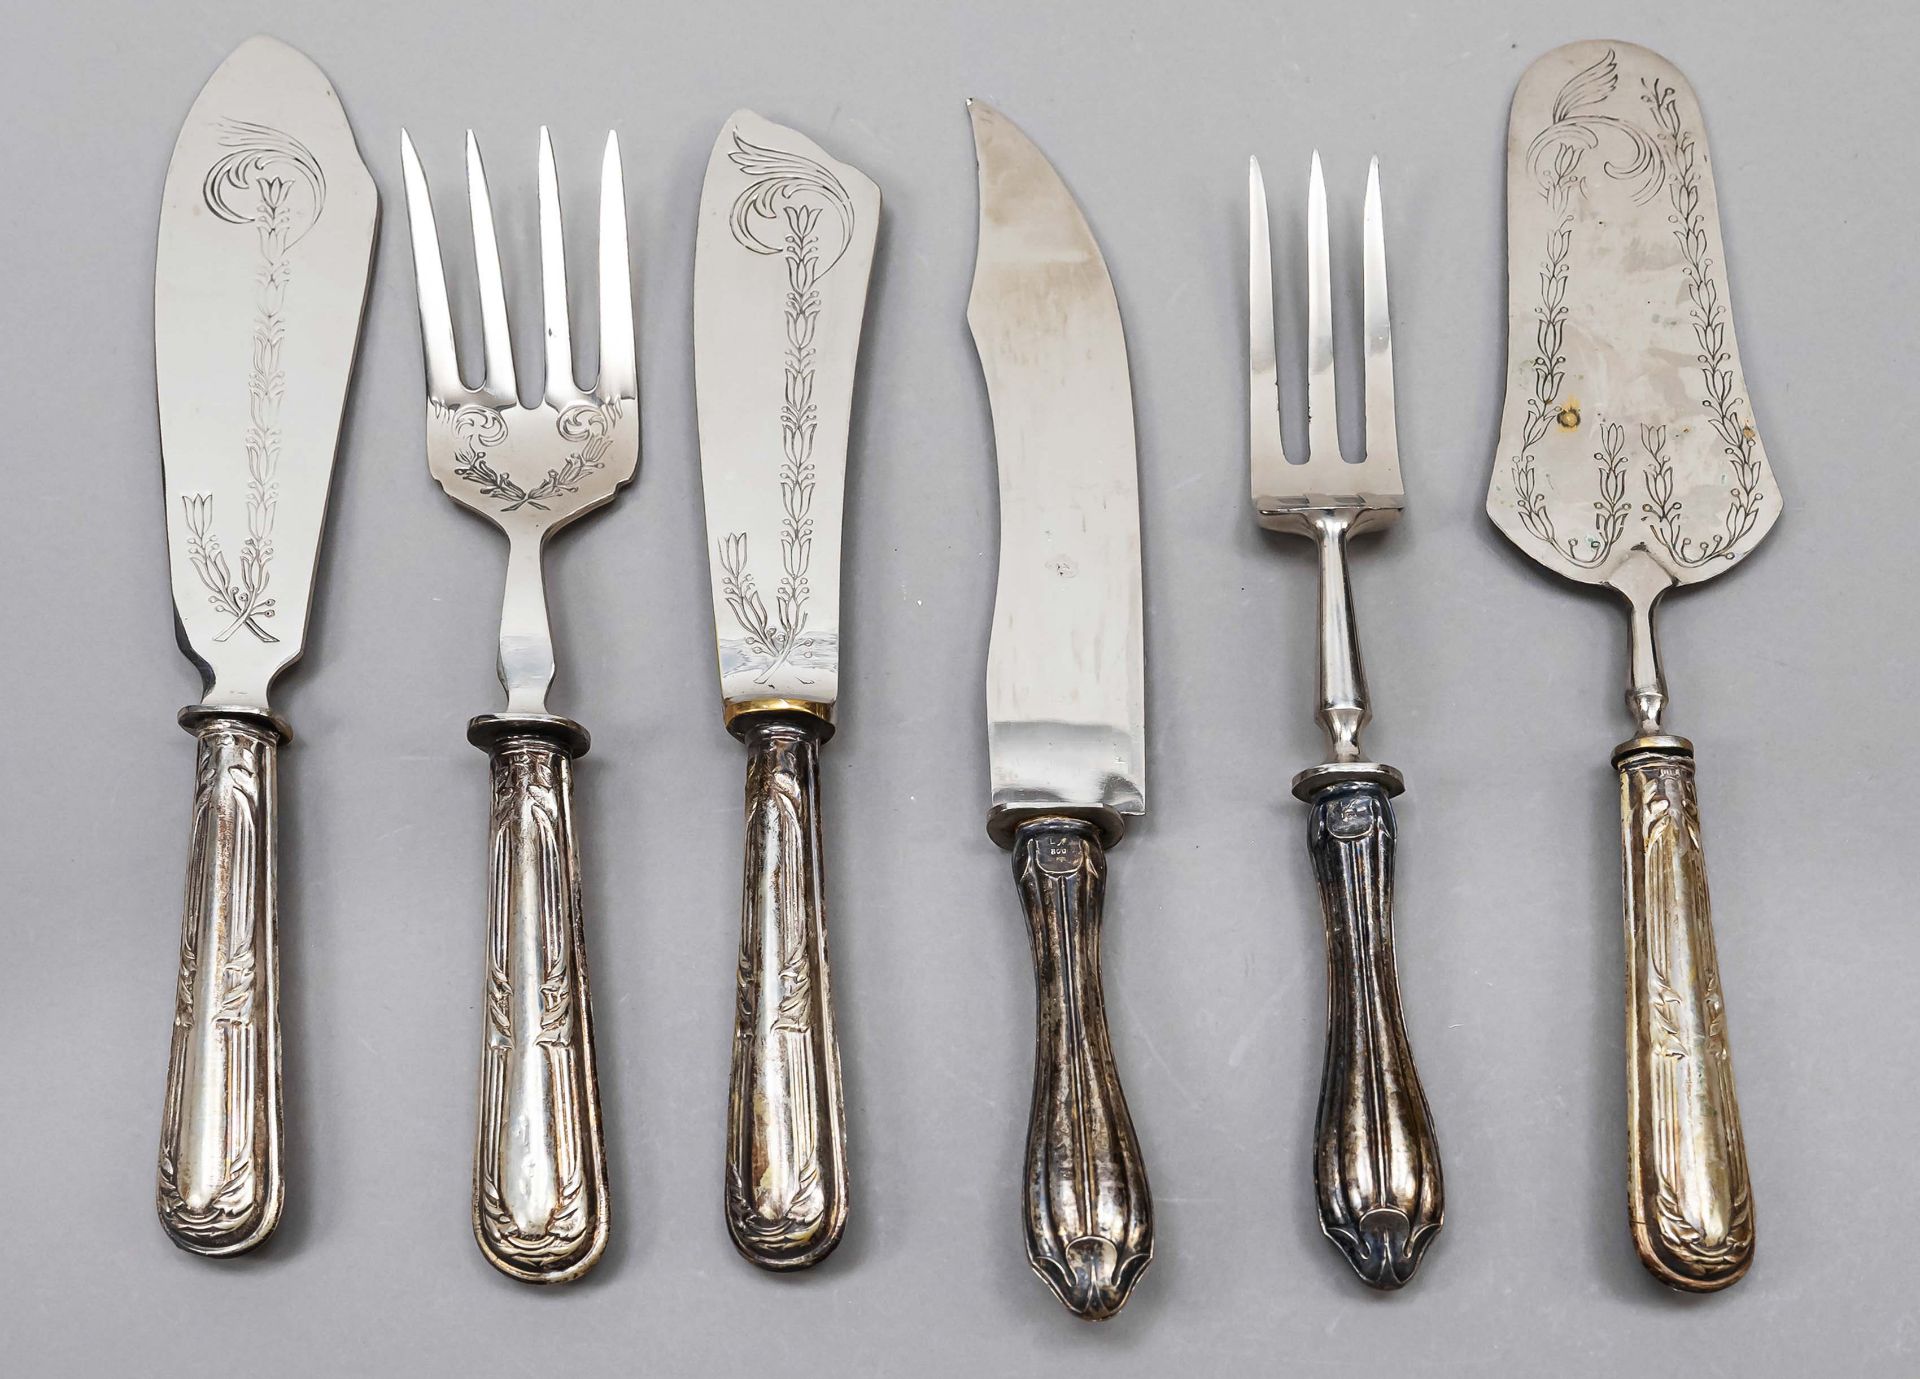 Six pieces of serving cutlery, 20th c., different makers, silver 800/000 or tested, 2 different